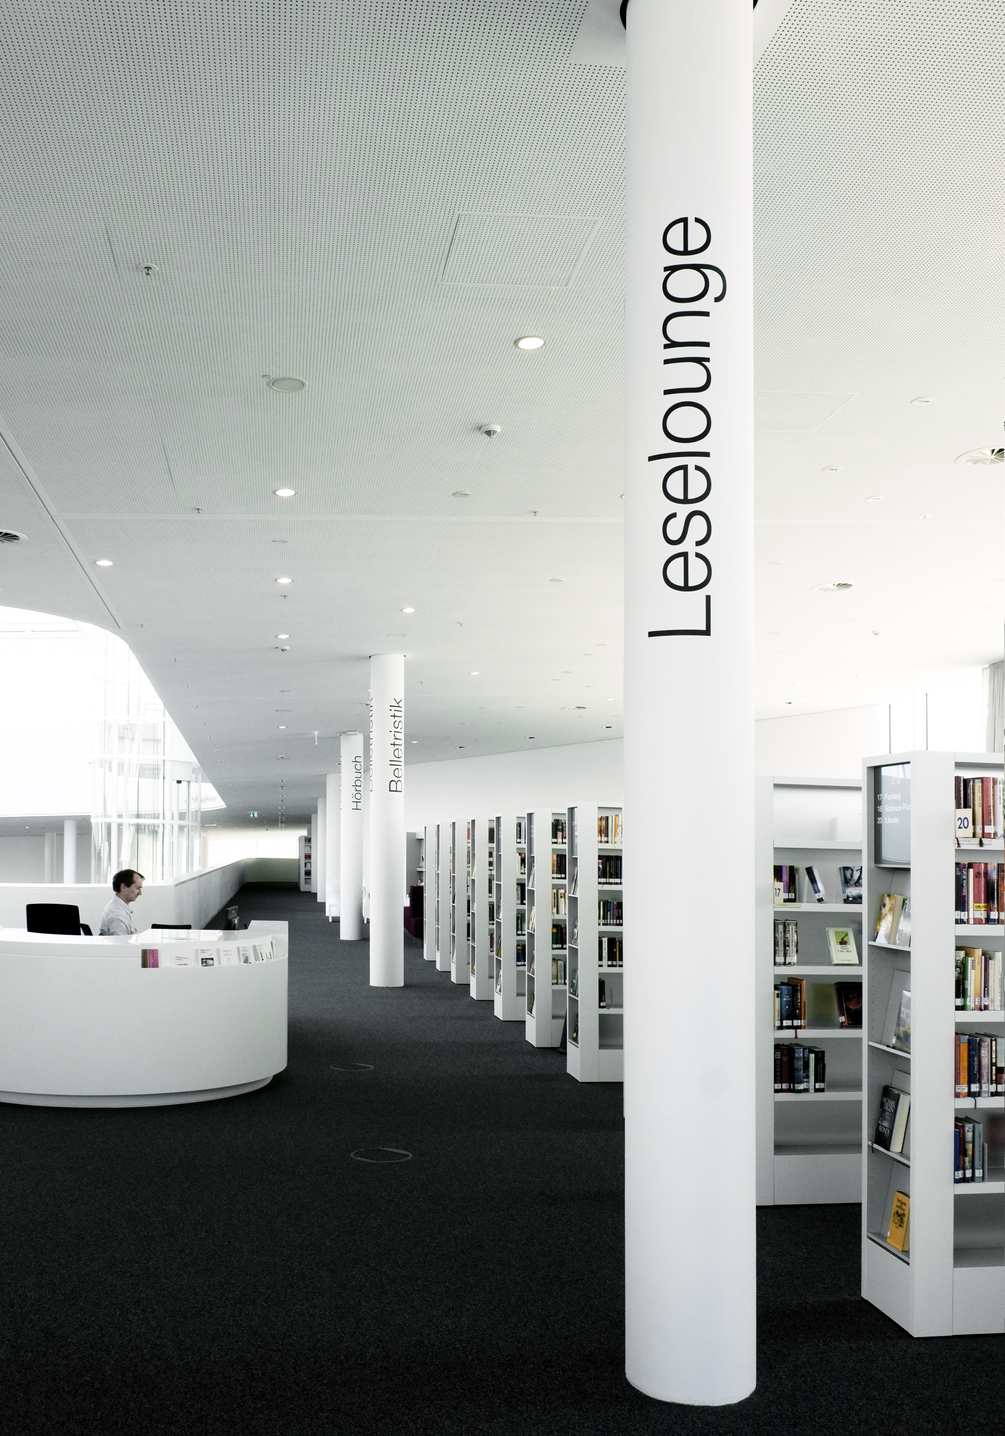 wayfinding-library-9-1005x1435px